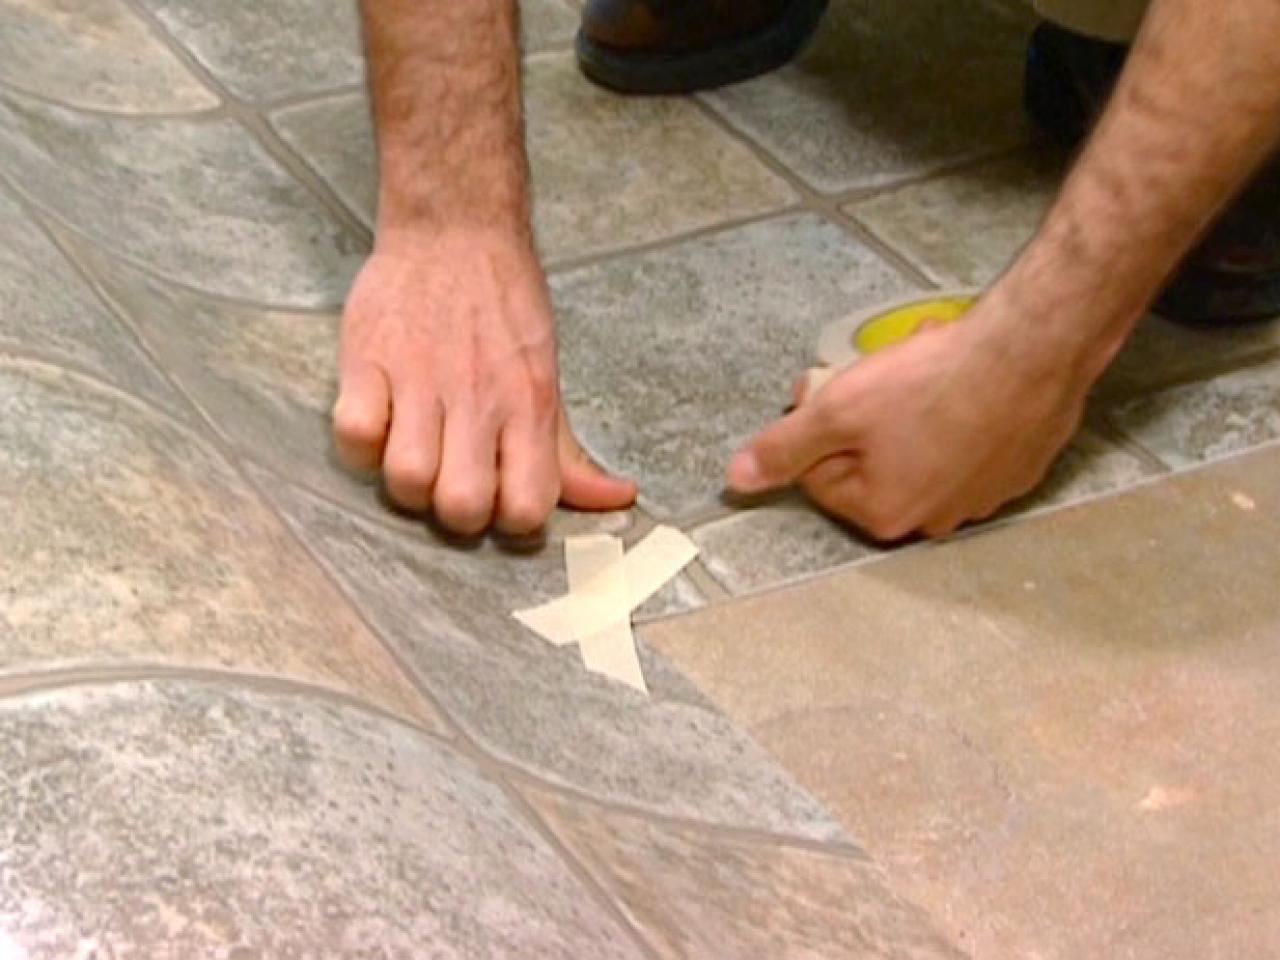 How To Install Vinyl Flooring Tos, How To Replace Ceramic Tile With Vinyl Flooring